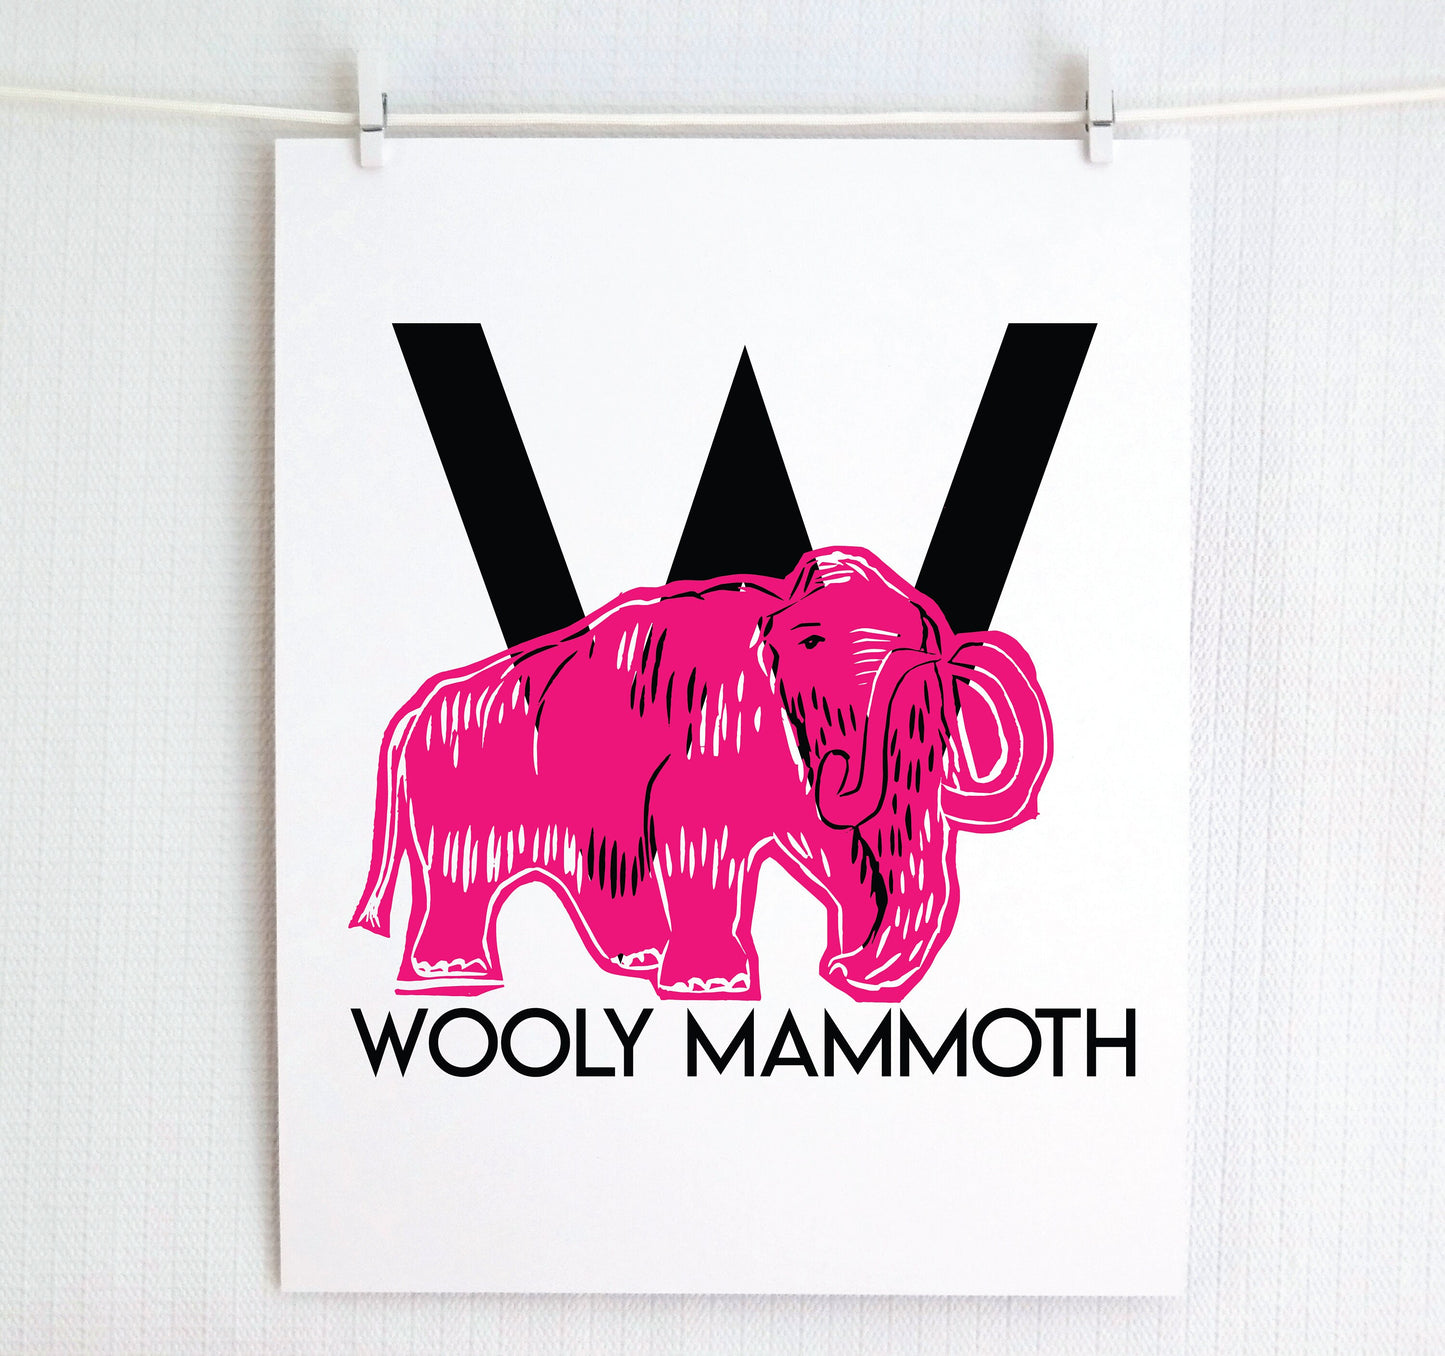 W is for Wooly Mammoth